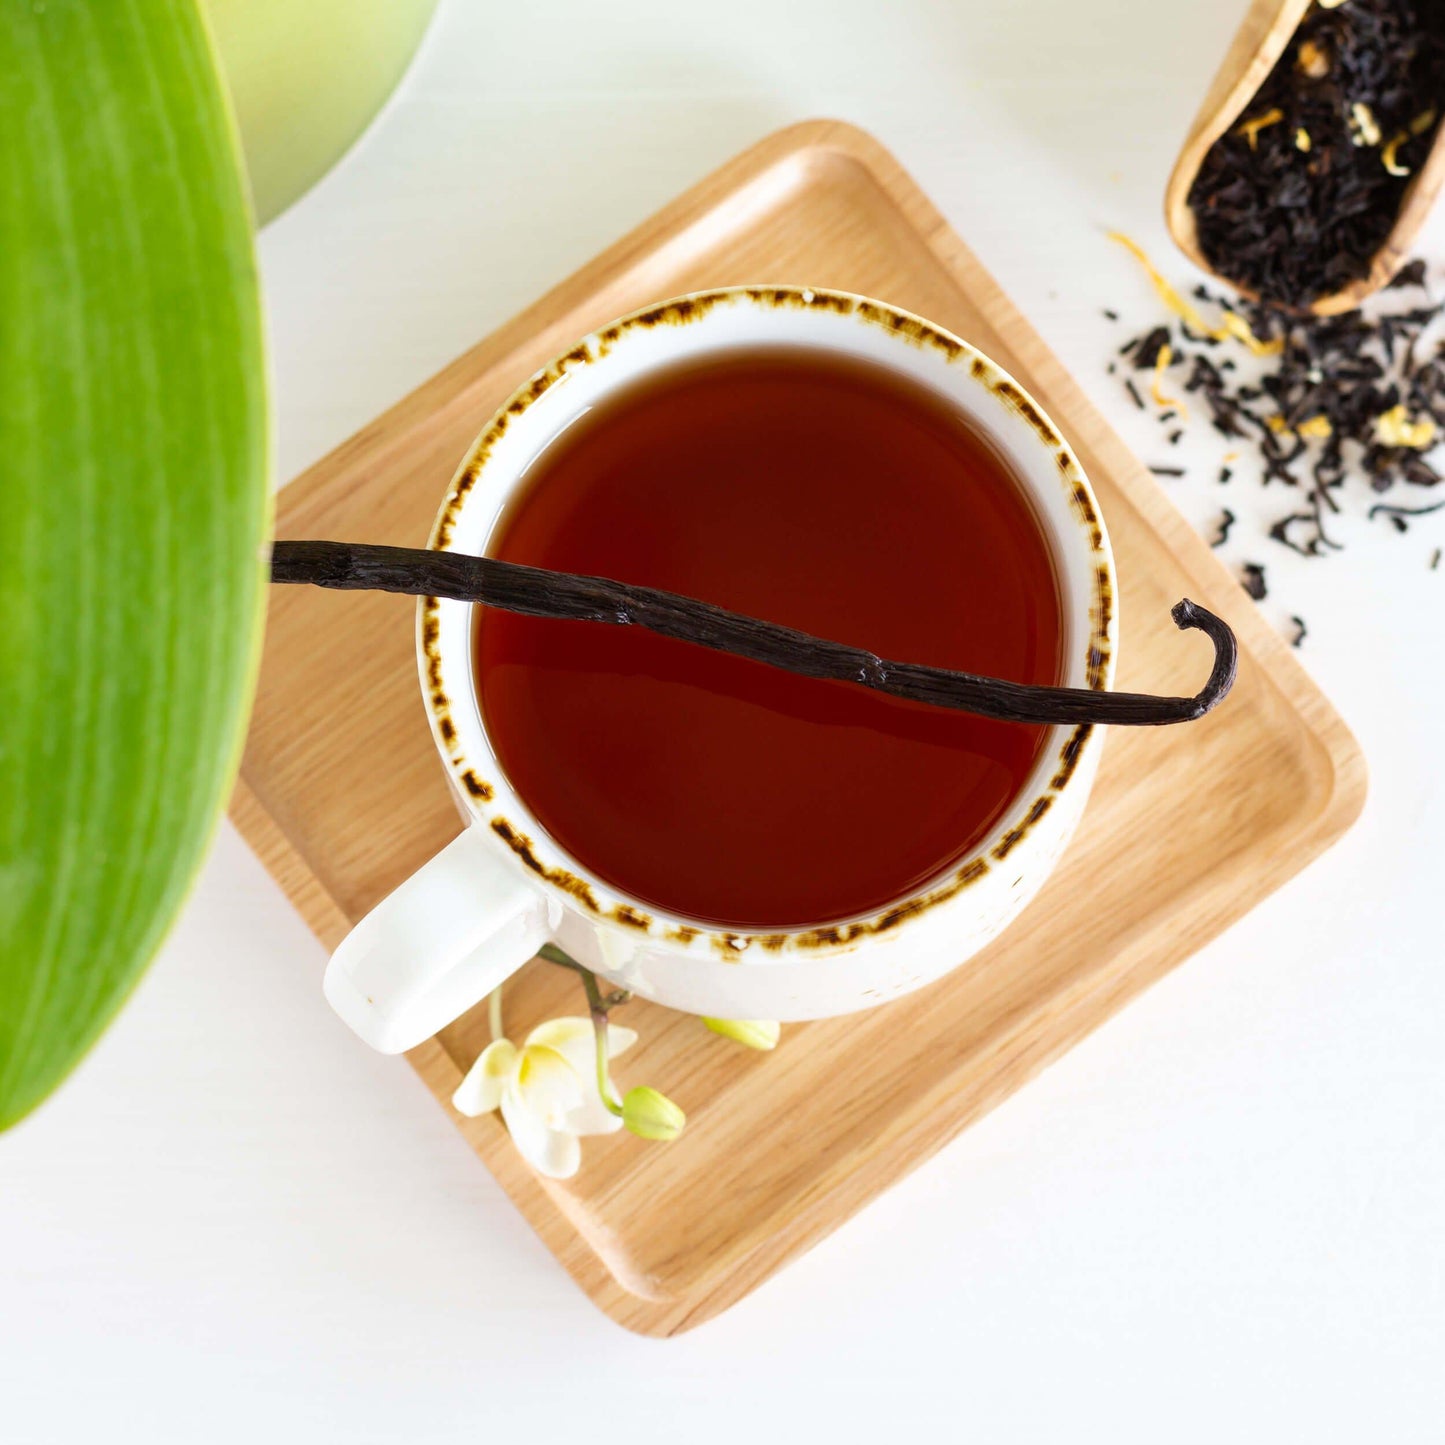 Vanilla Velvet Black Tea shown from above as brewed tea in a white mug with brown rim, displayed on a square bamboo coaster, with a vanilla bean lying across the top of the mug. 